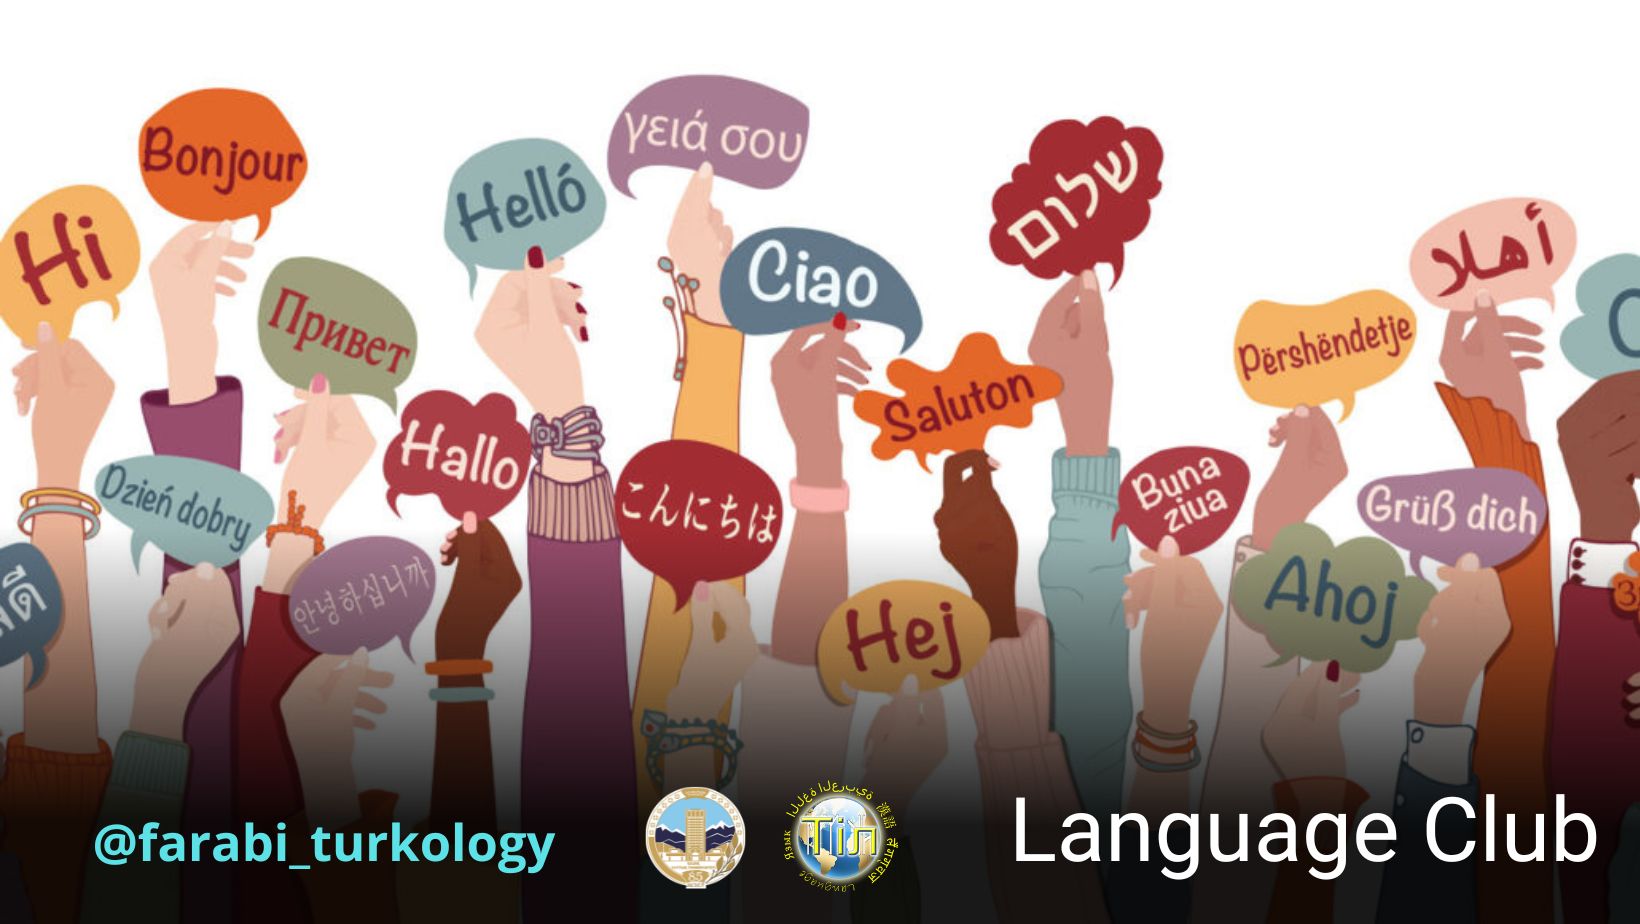 The Department of Turkology  and Language Theory invites you to the Language Club